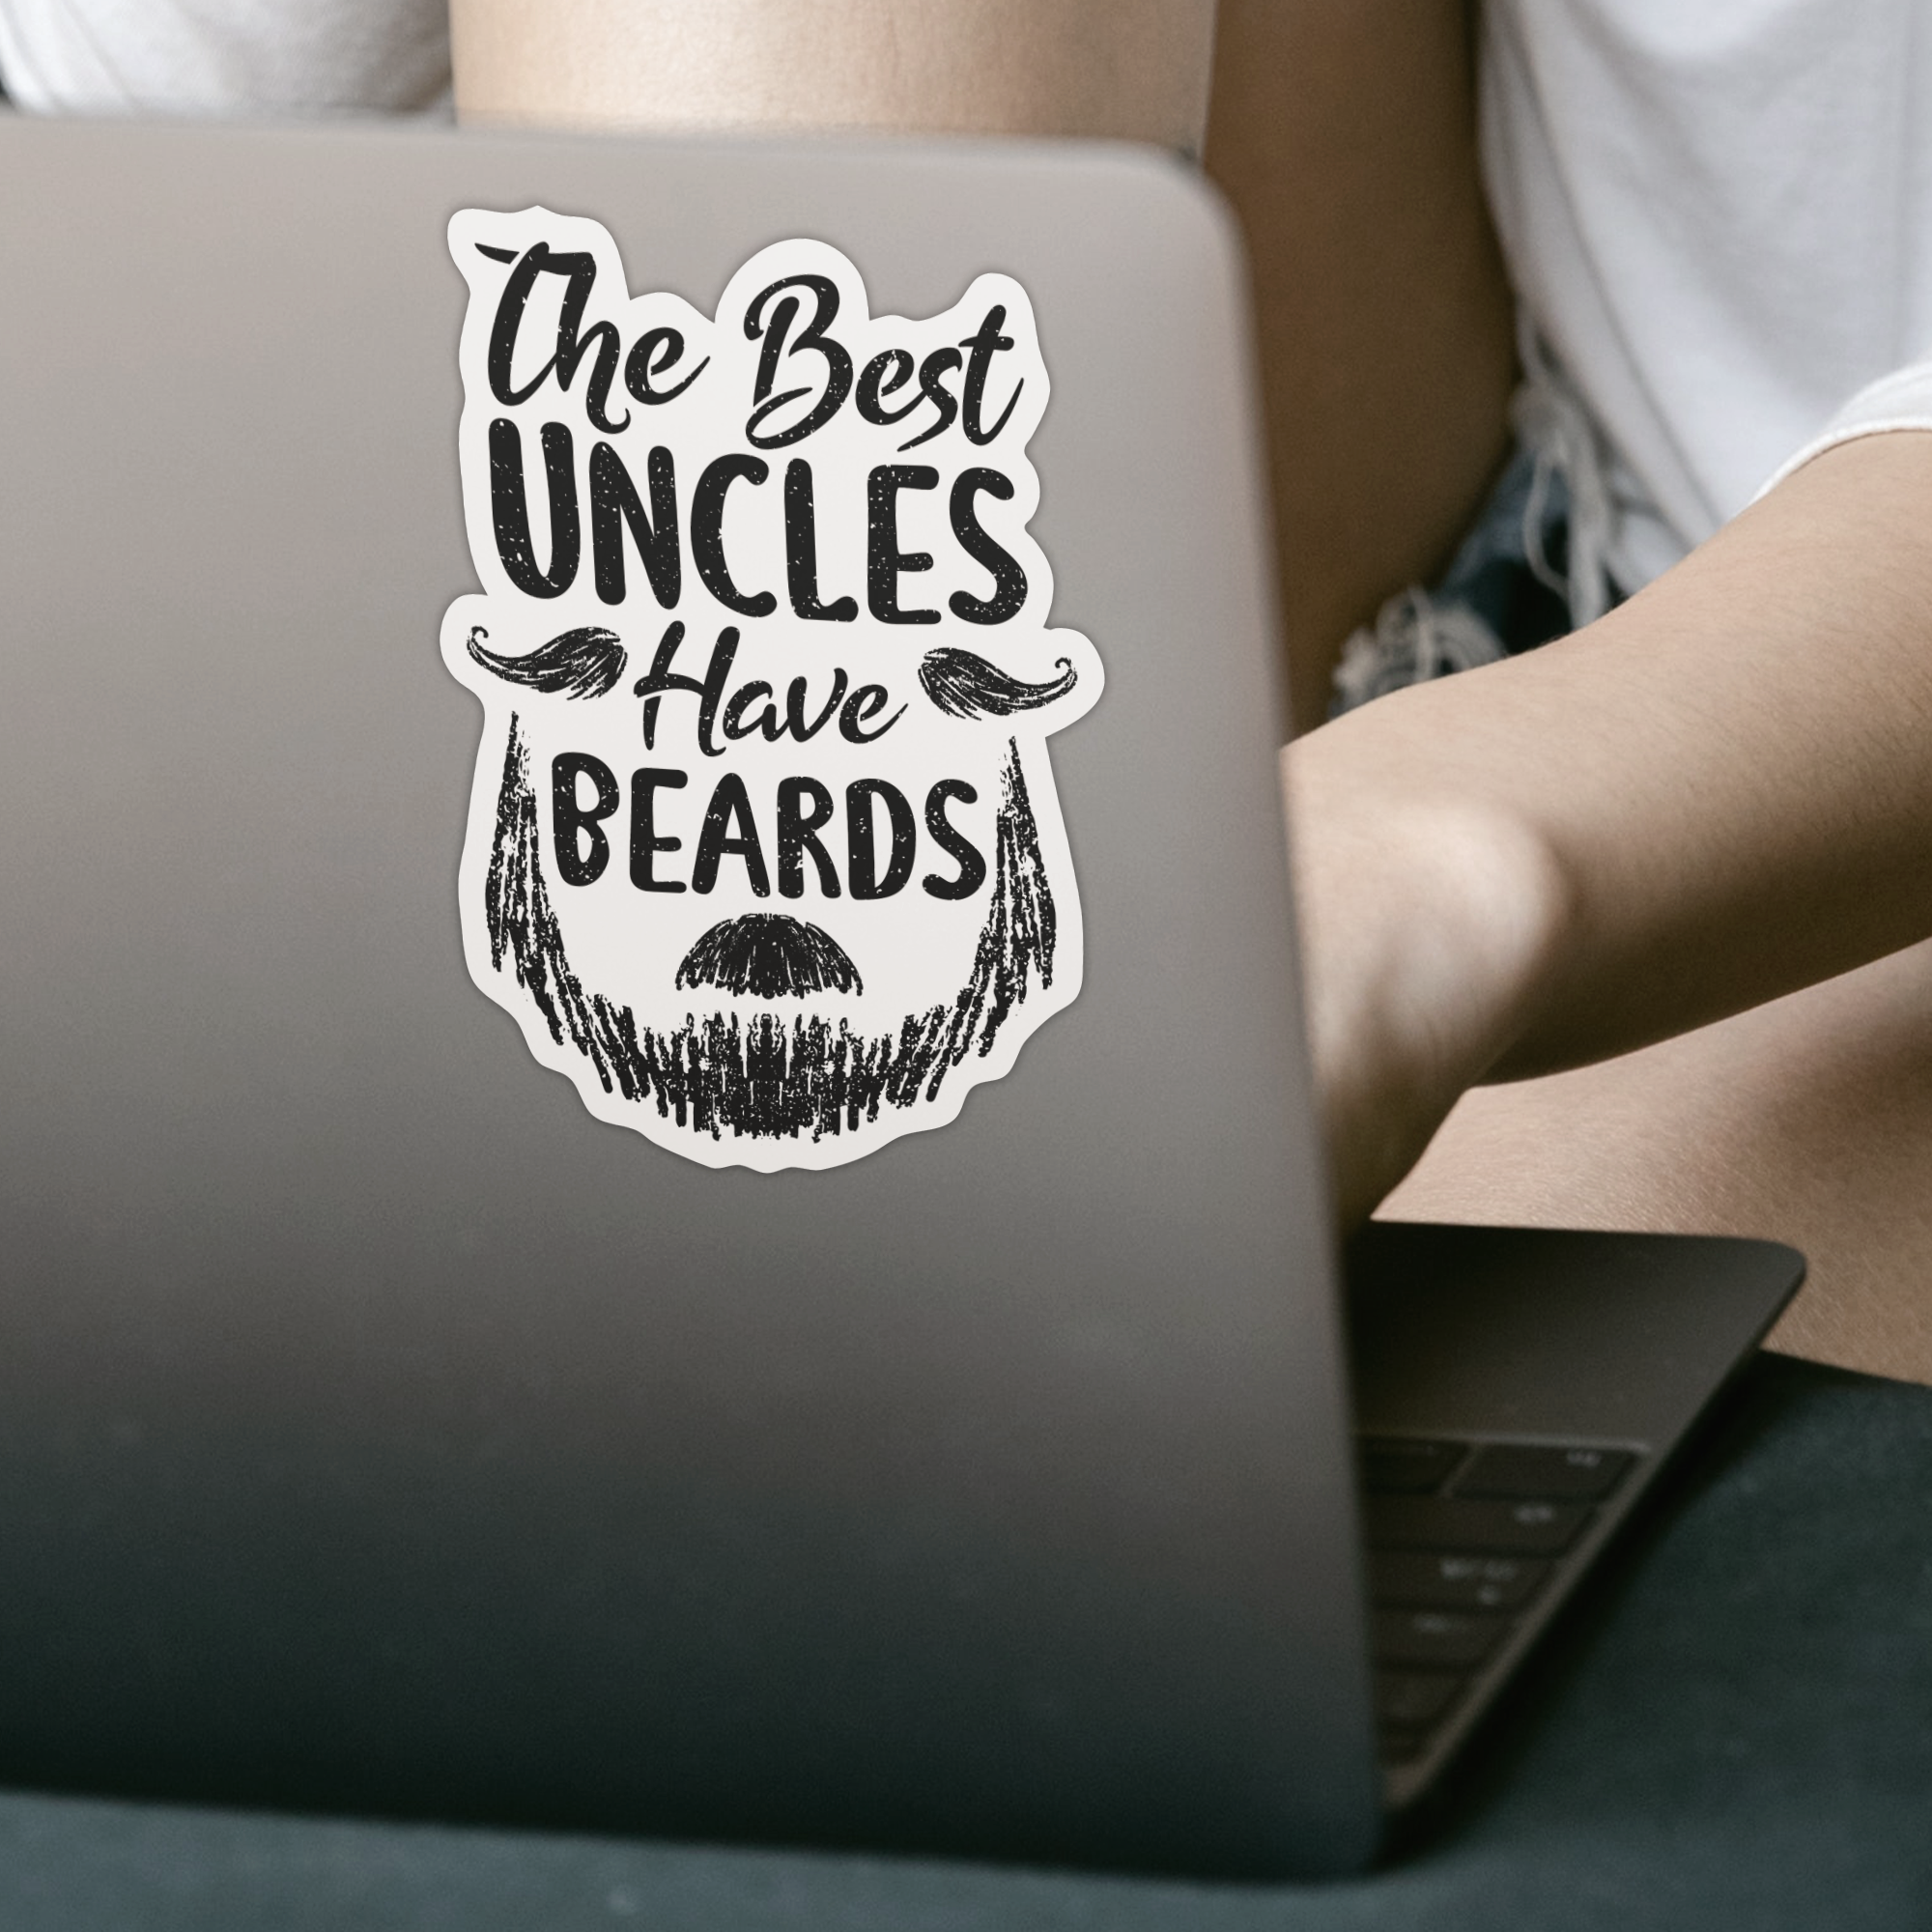 The Best Uncles Have Beards Sticker - DESIGNSBYJNK5.COM